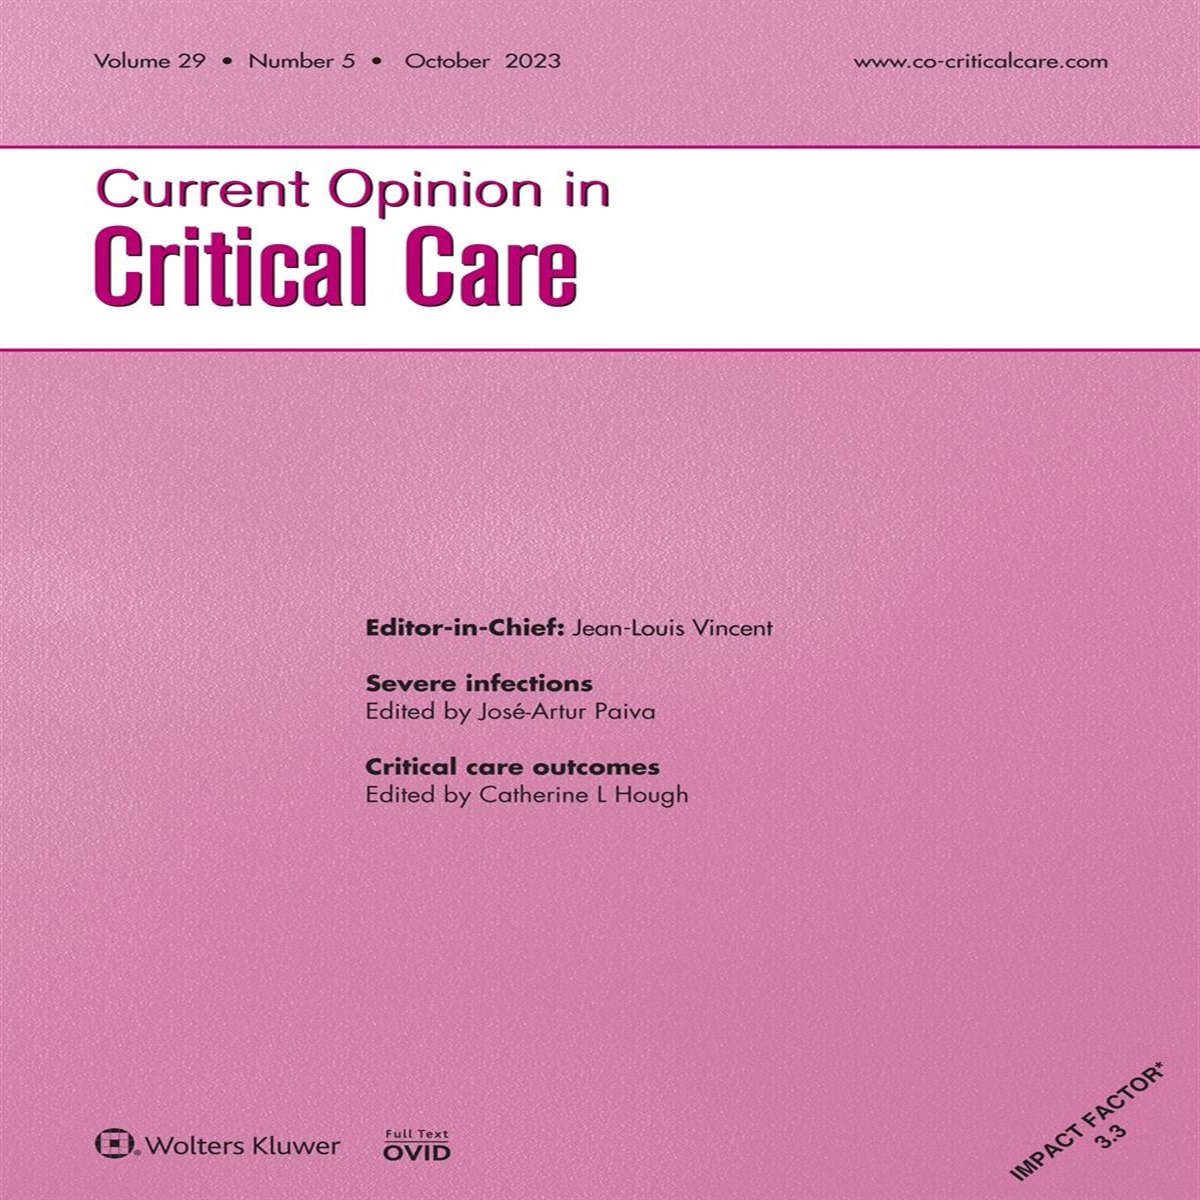 Editorial: All together now: improving critical care outcomes through multidisciplinary and interprofessional teamwork